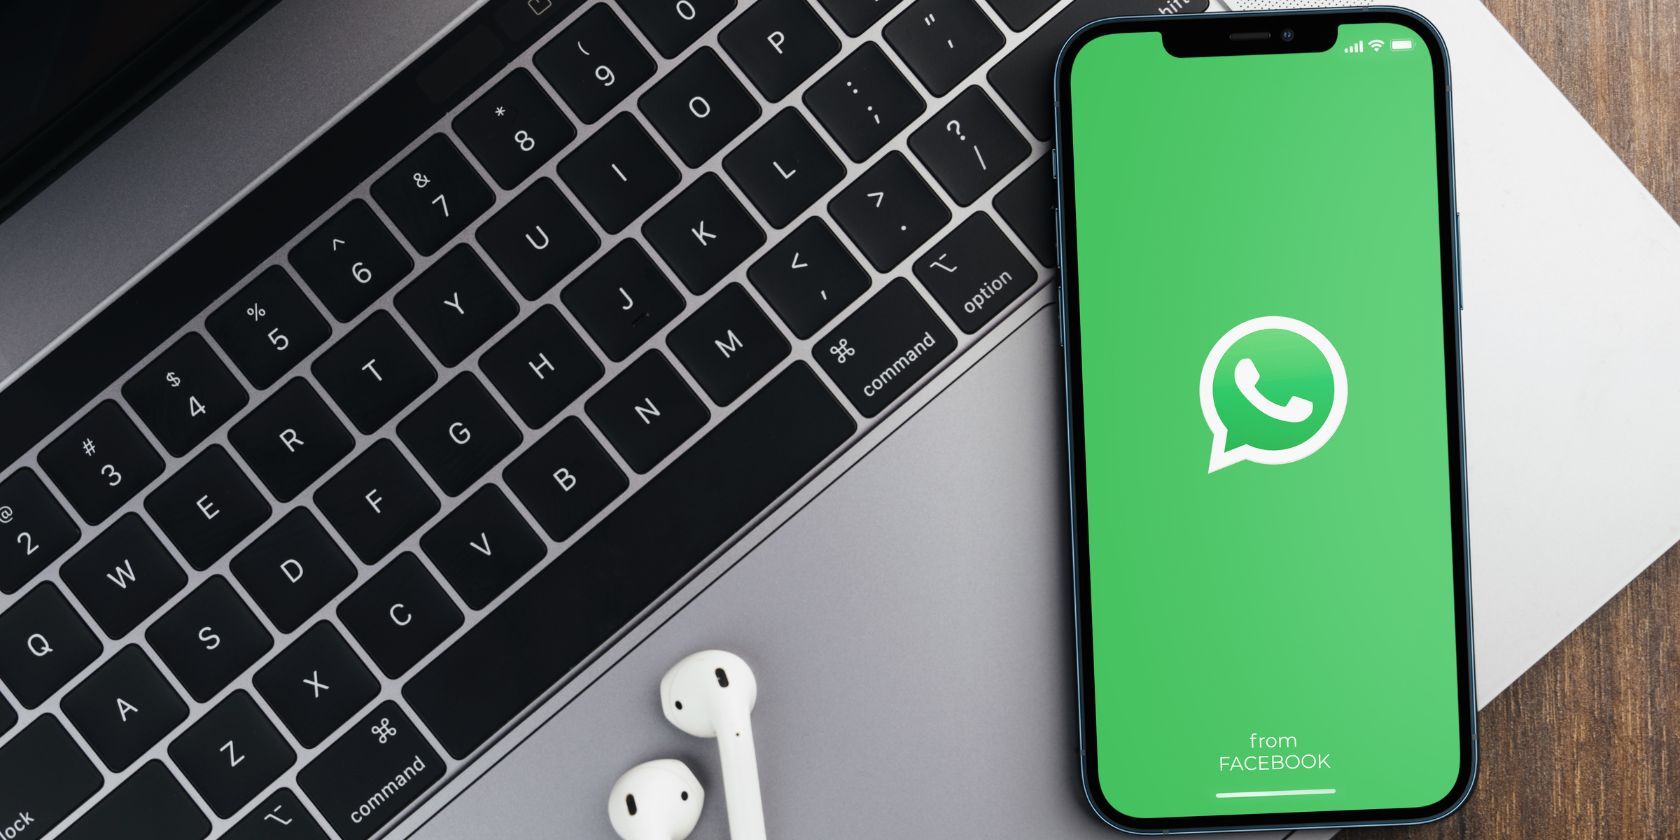 the whatsapp app on a smartphone with a laptop keyboard in the background